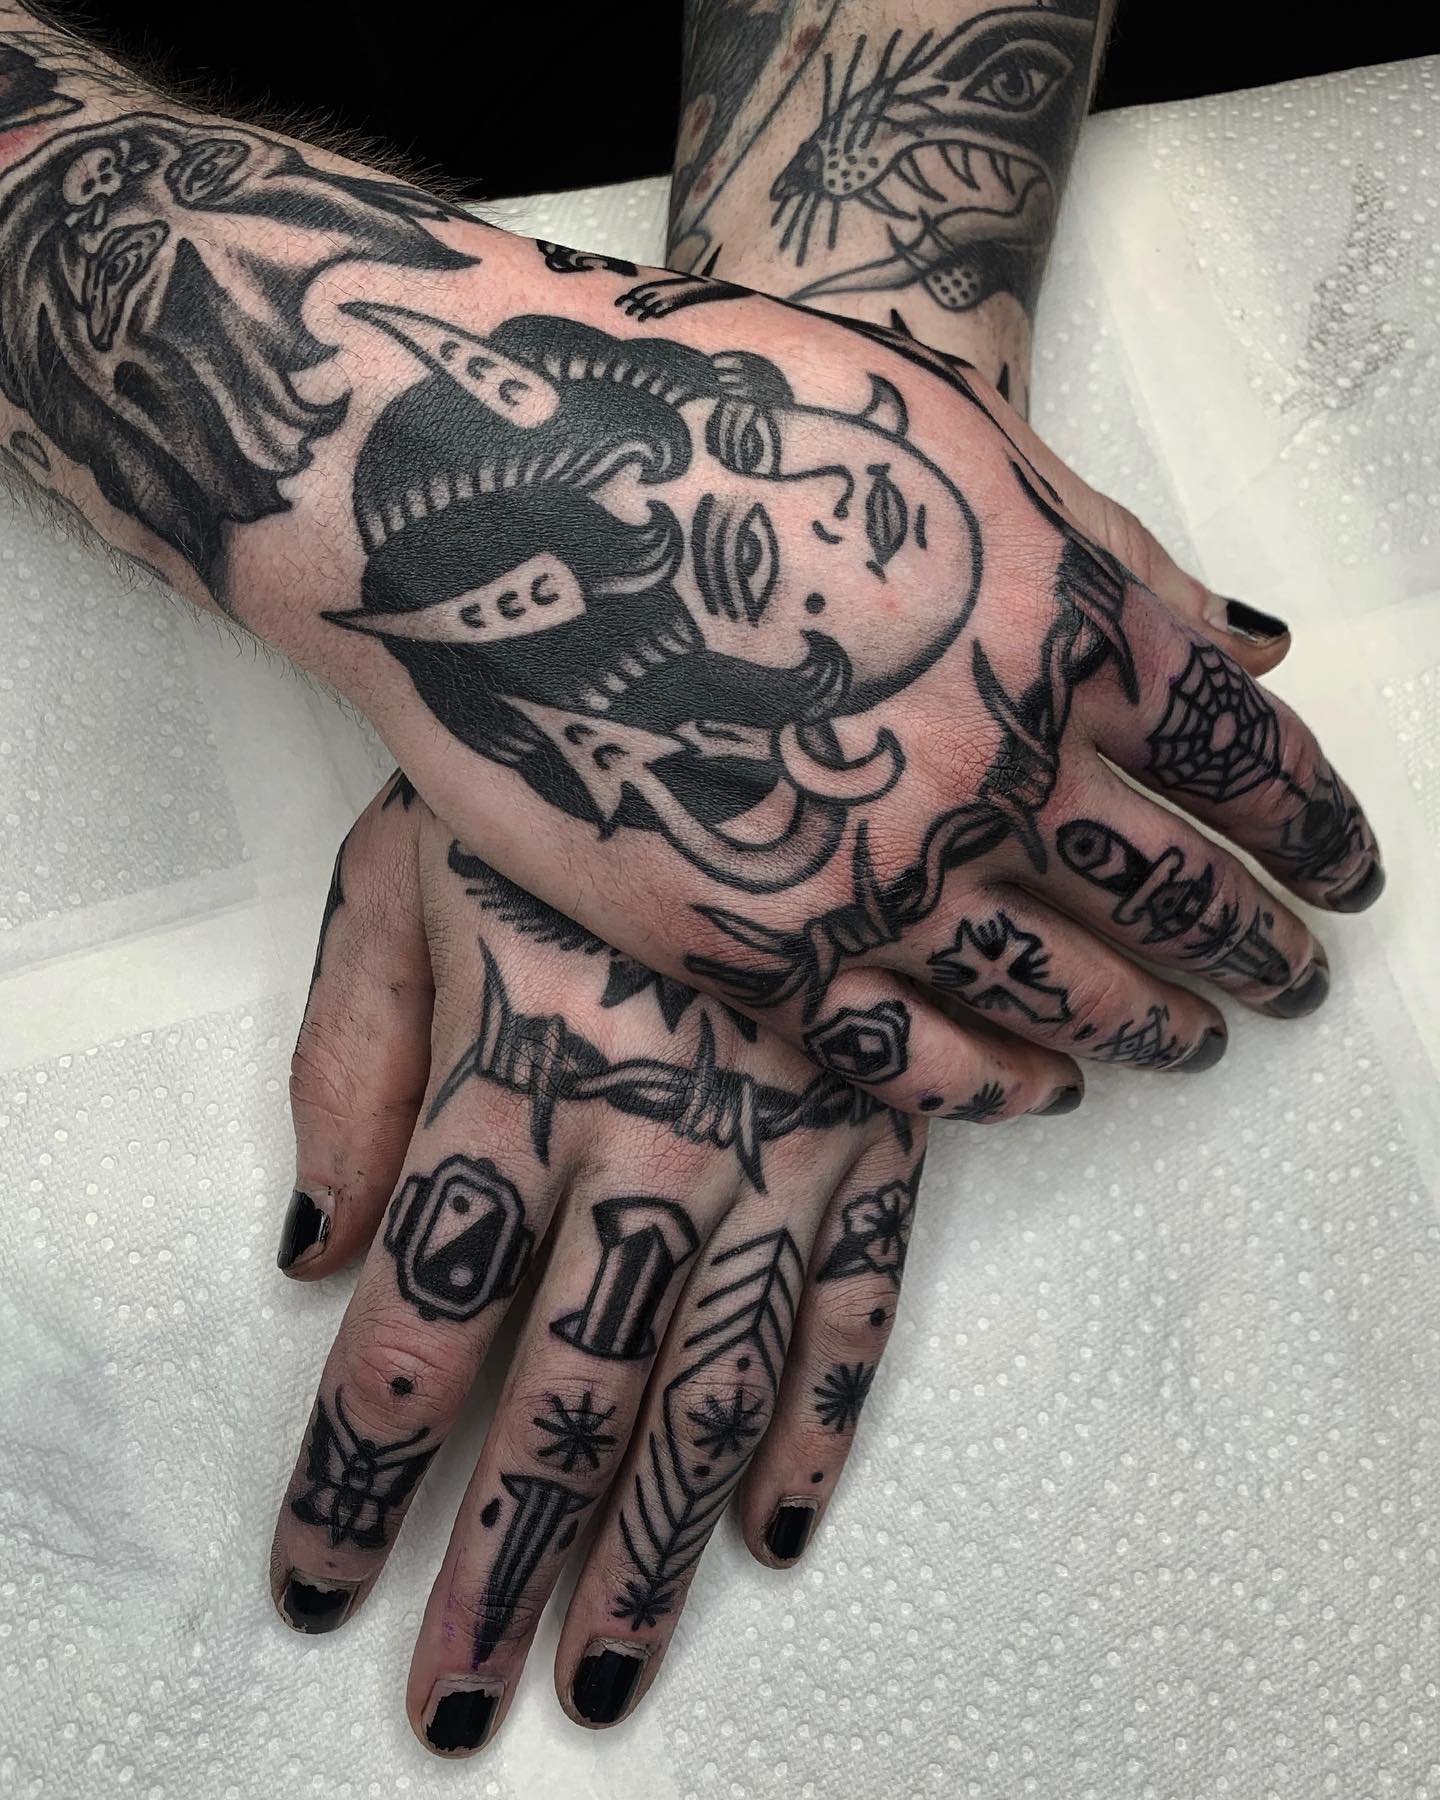 60 Skeleton Hand Tattoo Ideas with Meaning | Art and Design